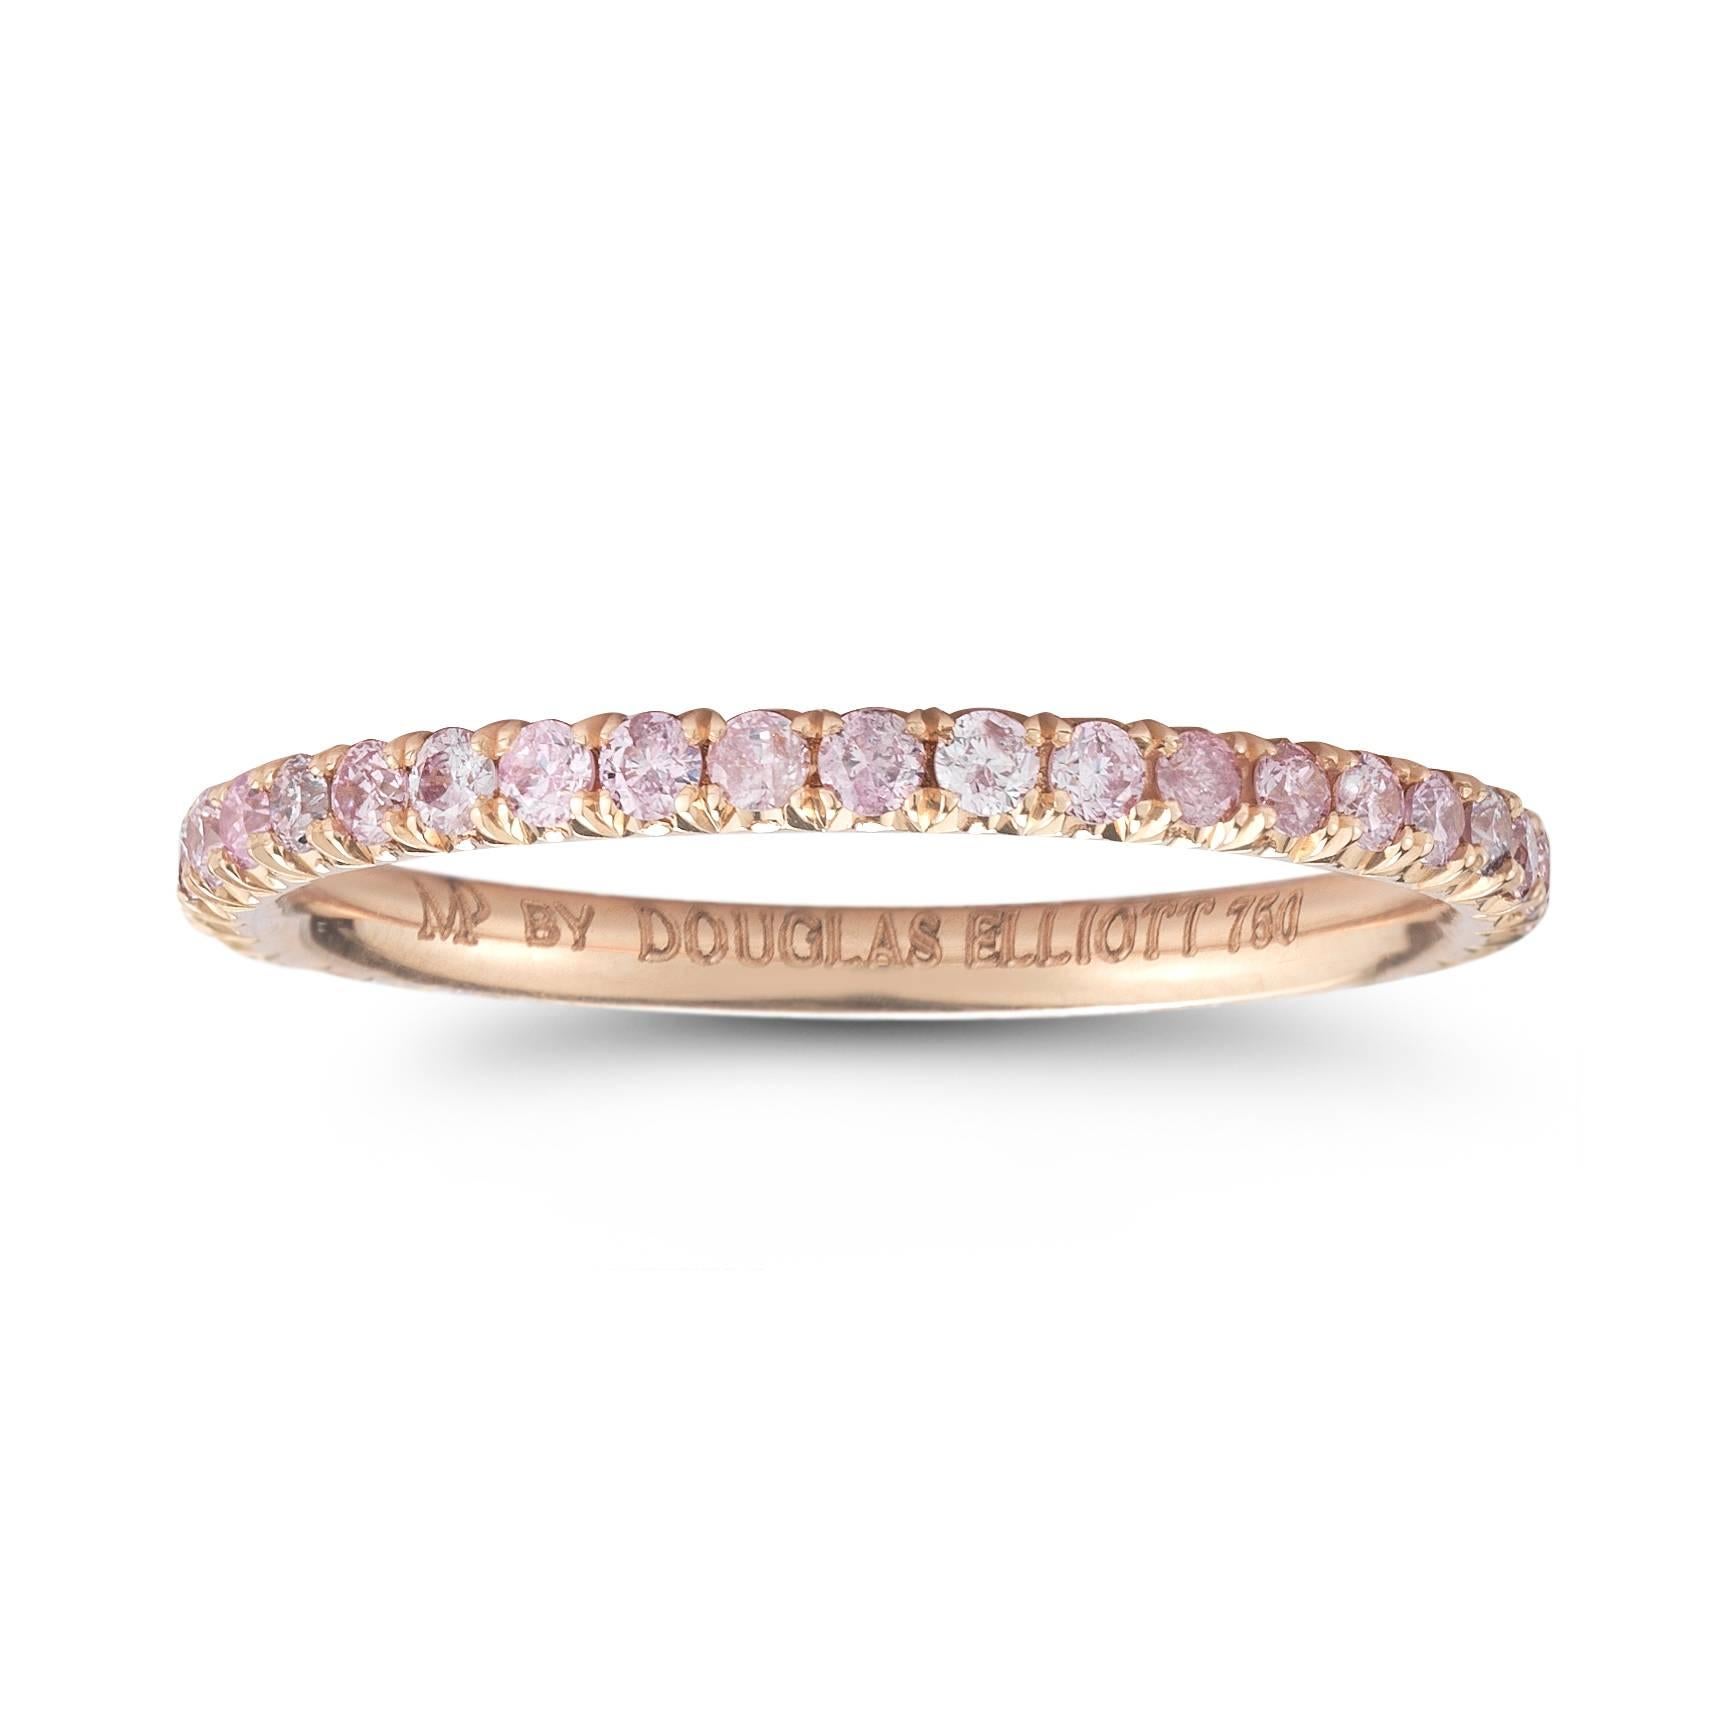 18k rose gold fancy pink micro pave eternity band. Impossibly thin, this hand crafted band features .39 carats of fancy pink diamonds. Made in New York City, each diamond is hand set into a solid piece of 18k rose gold under a microscope. All the